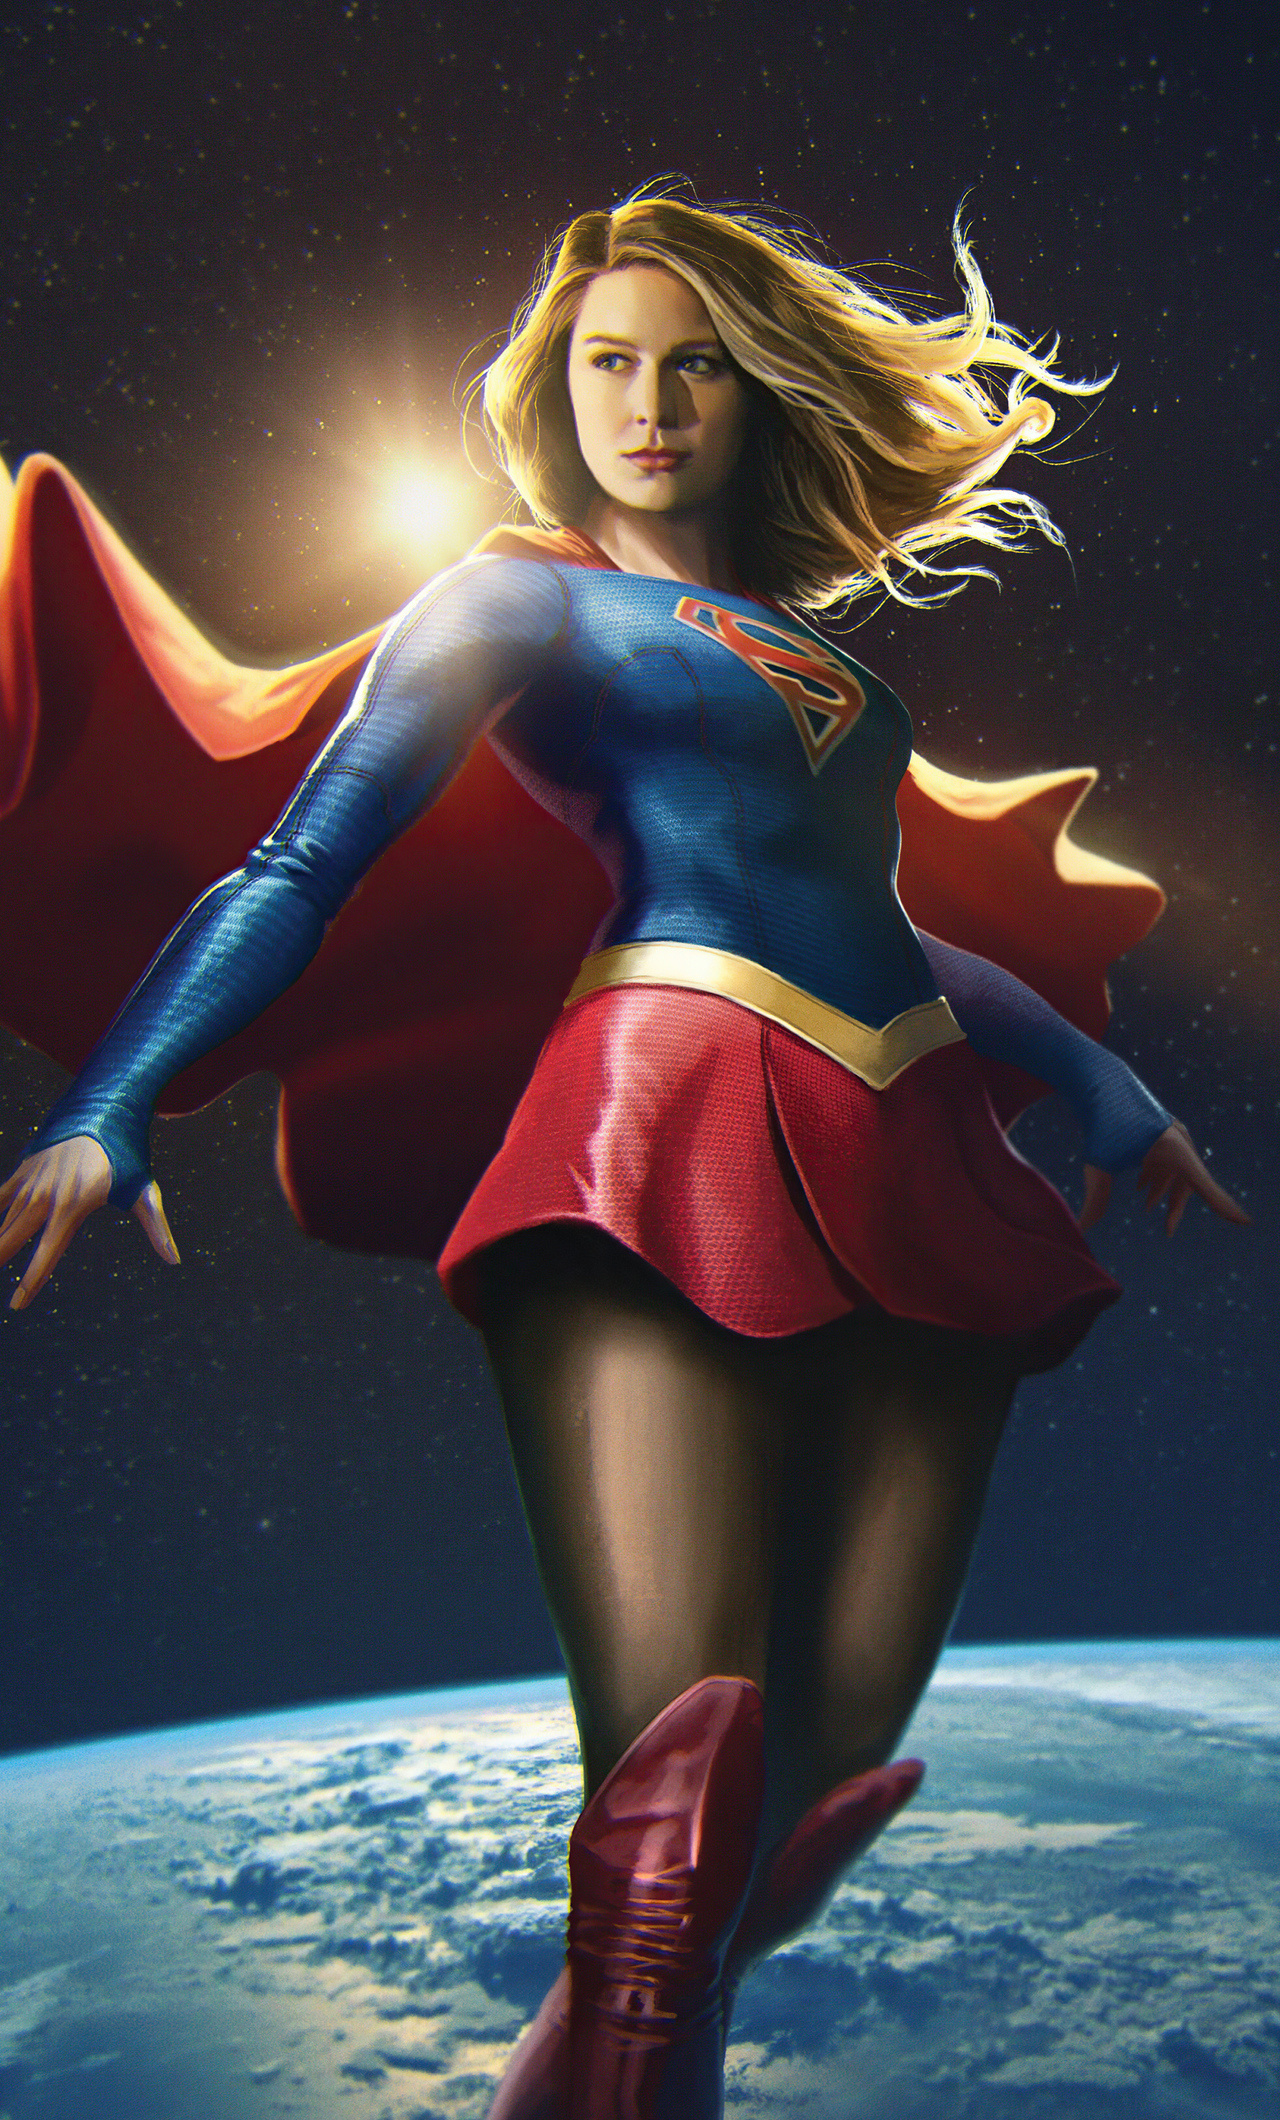 Supergirl in Central City, Superhero iPhone 6, HD 4K wallpapers, 1280x2120 HD Phone